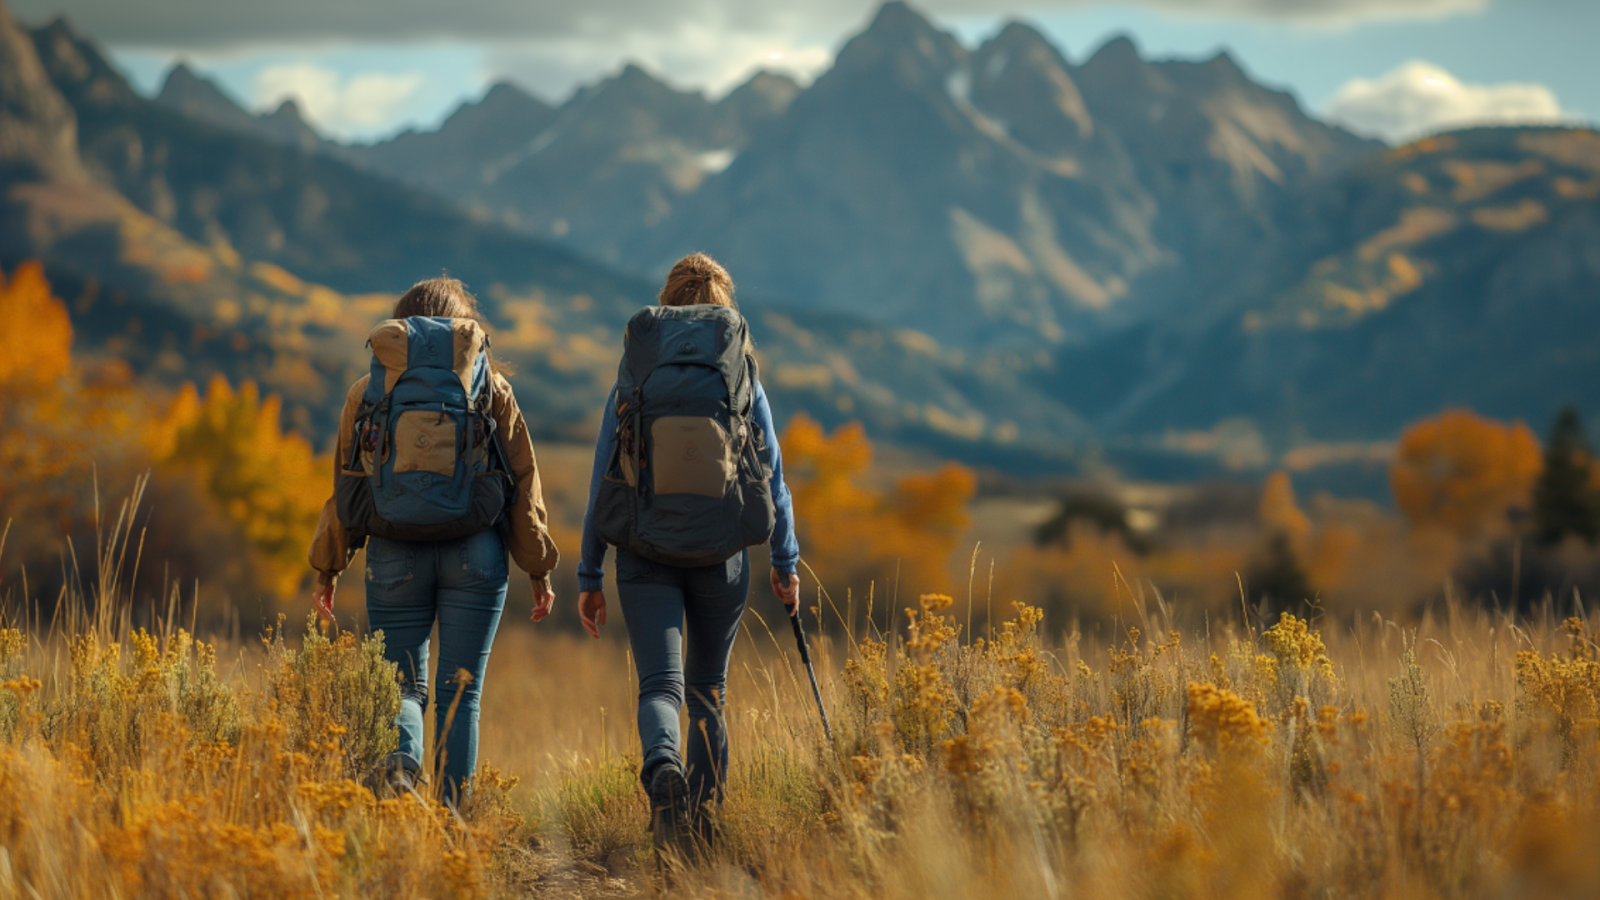 Tourists hiking in the Rocky Mountains near Denver, enjoying the natural scenery.